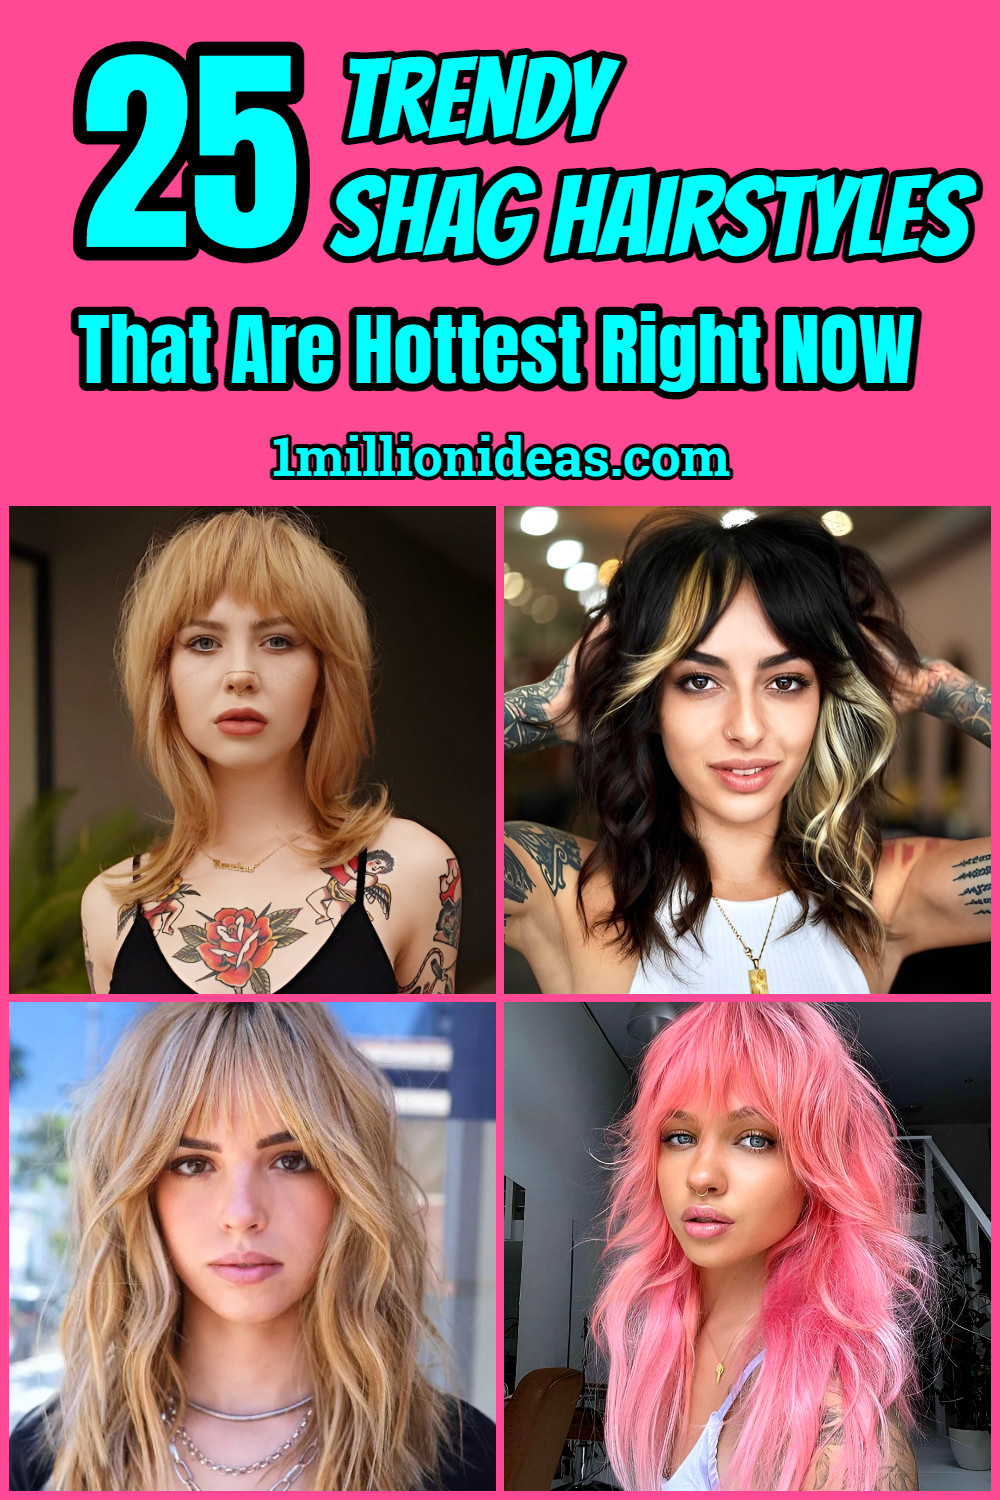 25 Trendy Shag Hairstyles That Are Hottest Right NOW - 161